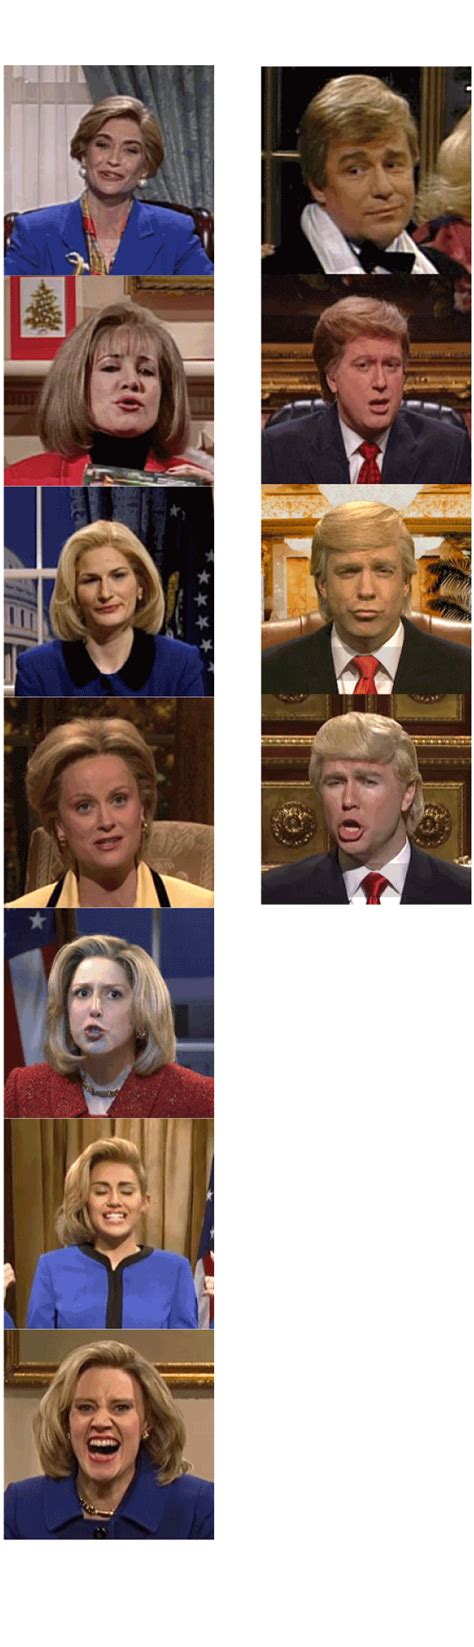 Trump Is Going On Snl Here Are The Other Appearances By Politicians On